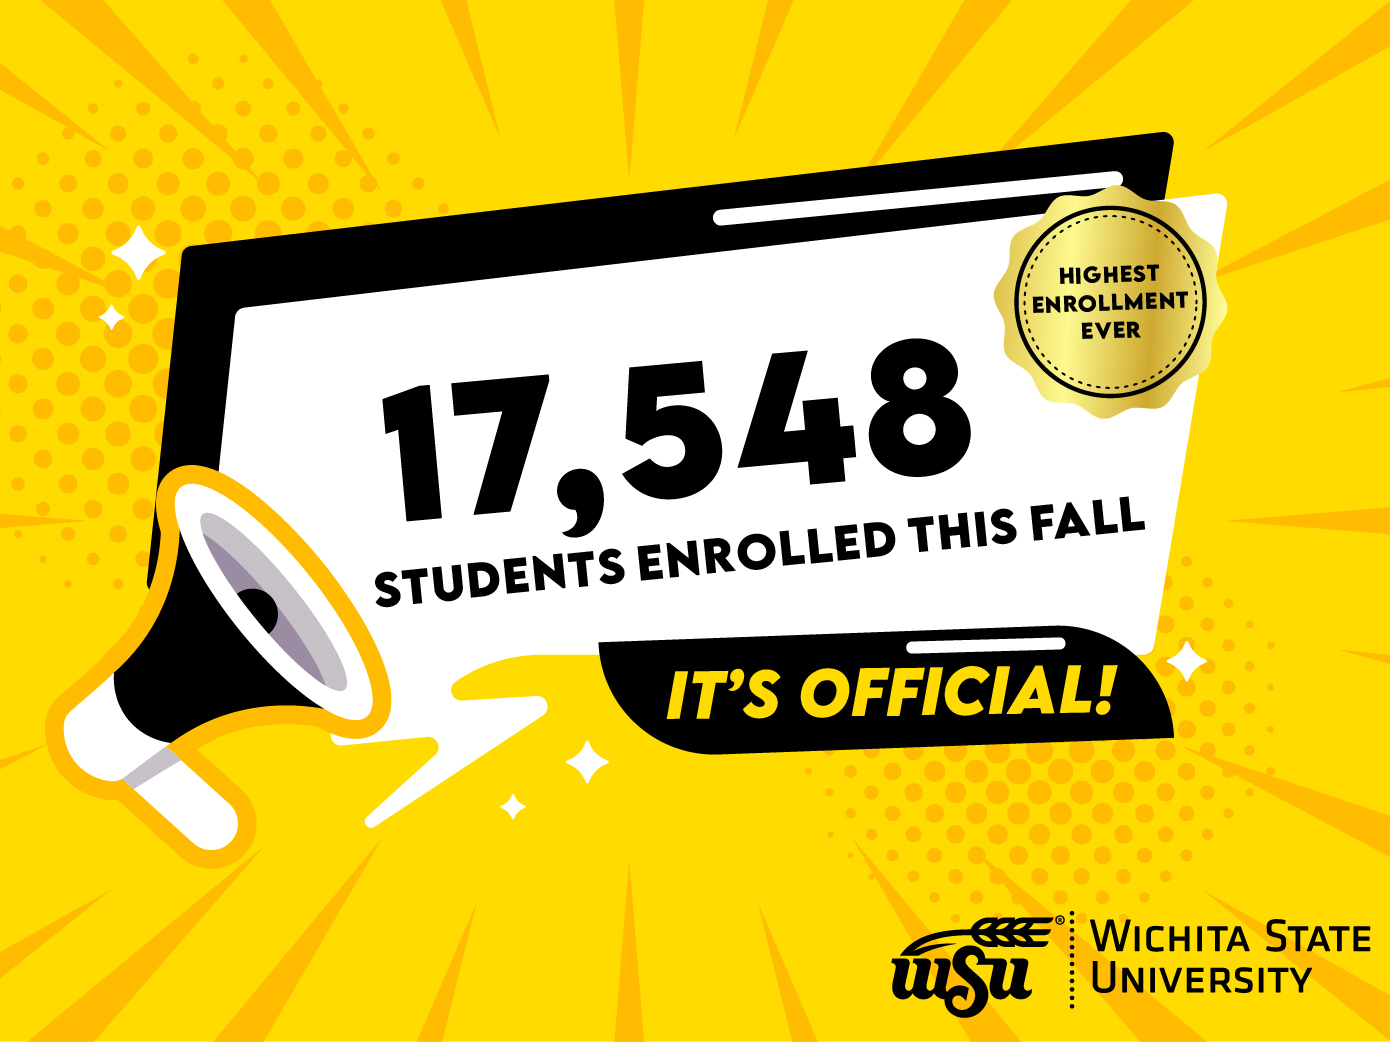 It's official, 17,548 students enrolled this fall. Wichita State University